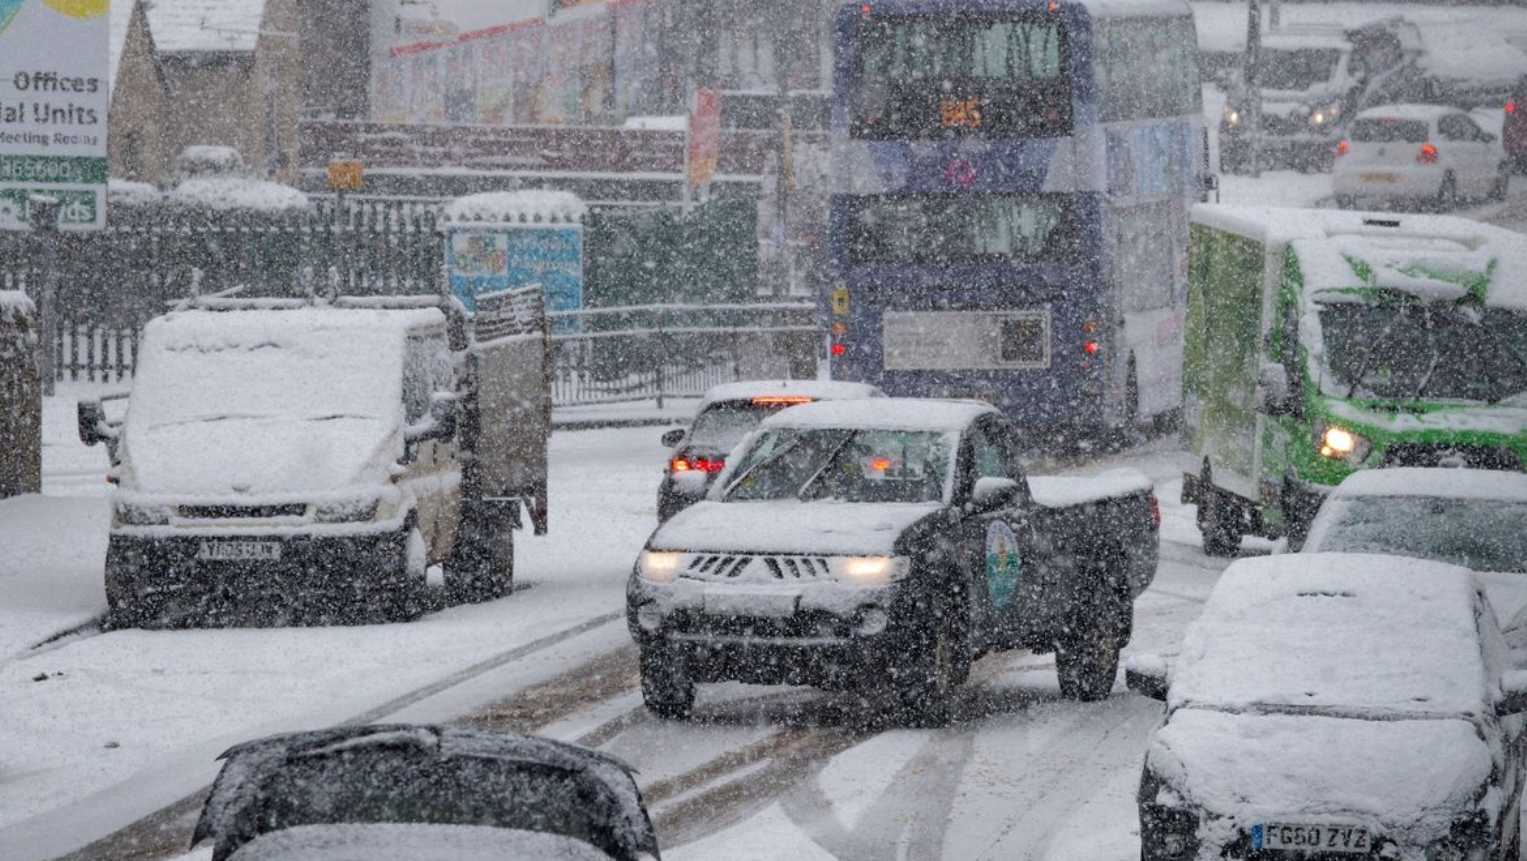 Storm Gladys: The UK is set for blizzards later this week with the Met Office warning of heavy snow and 70mph winds amid Storm Gladys